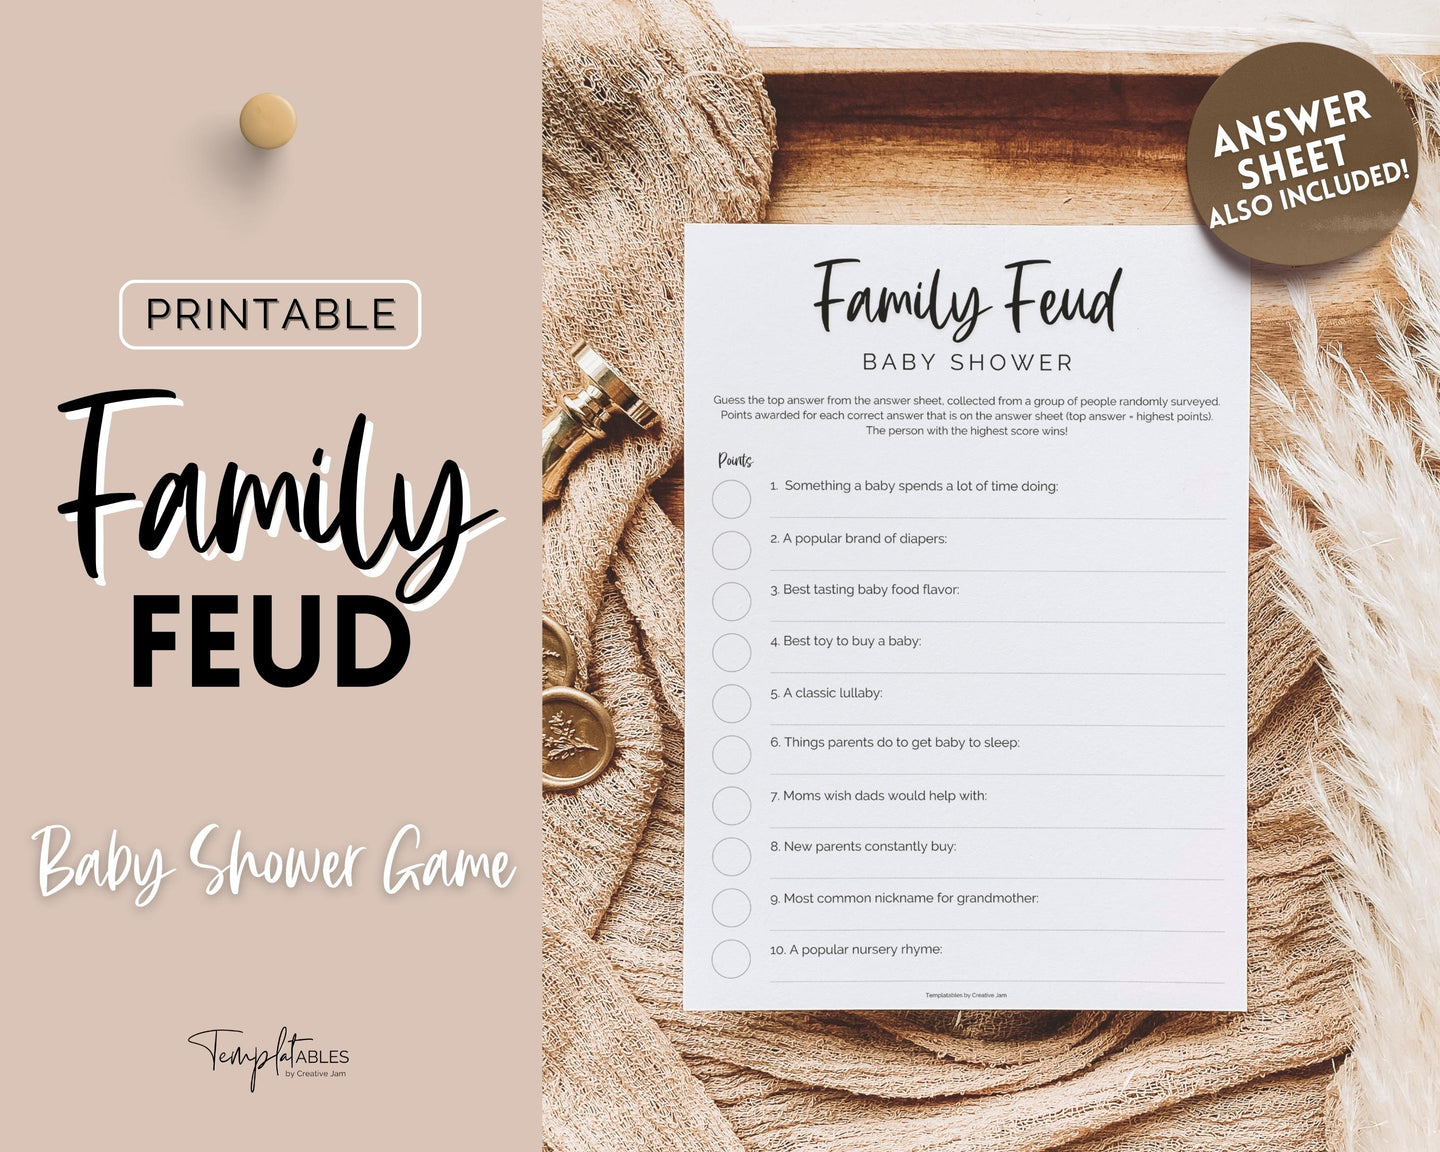 Family Feud Baby Shower Games Printable | Trivia Activity for Woodland, Boho, Neutral Theme Baby Showers